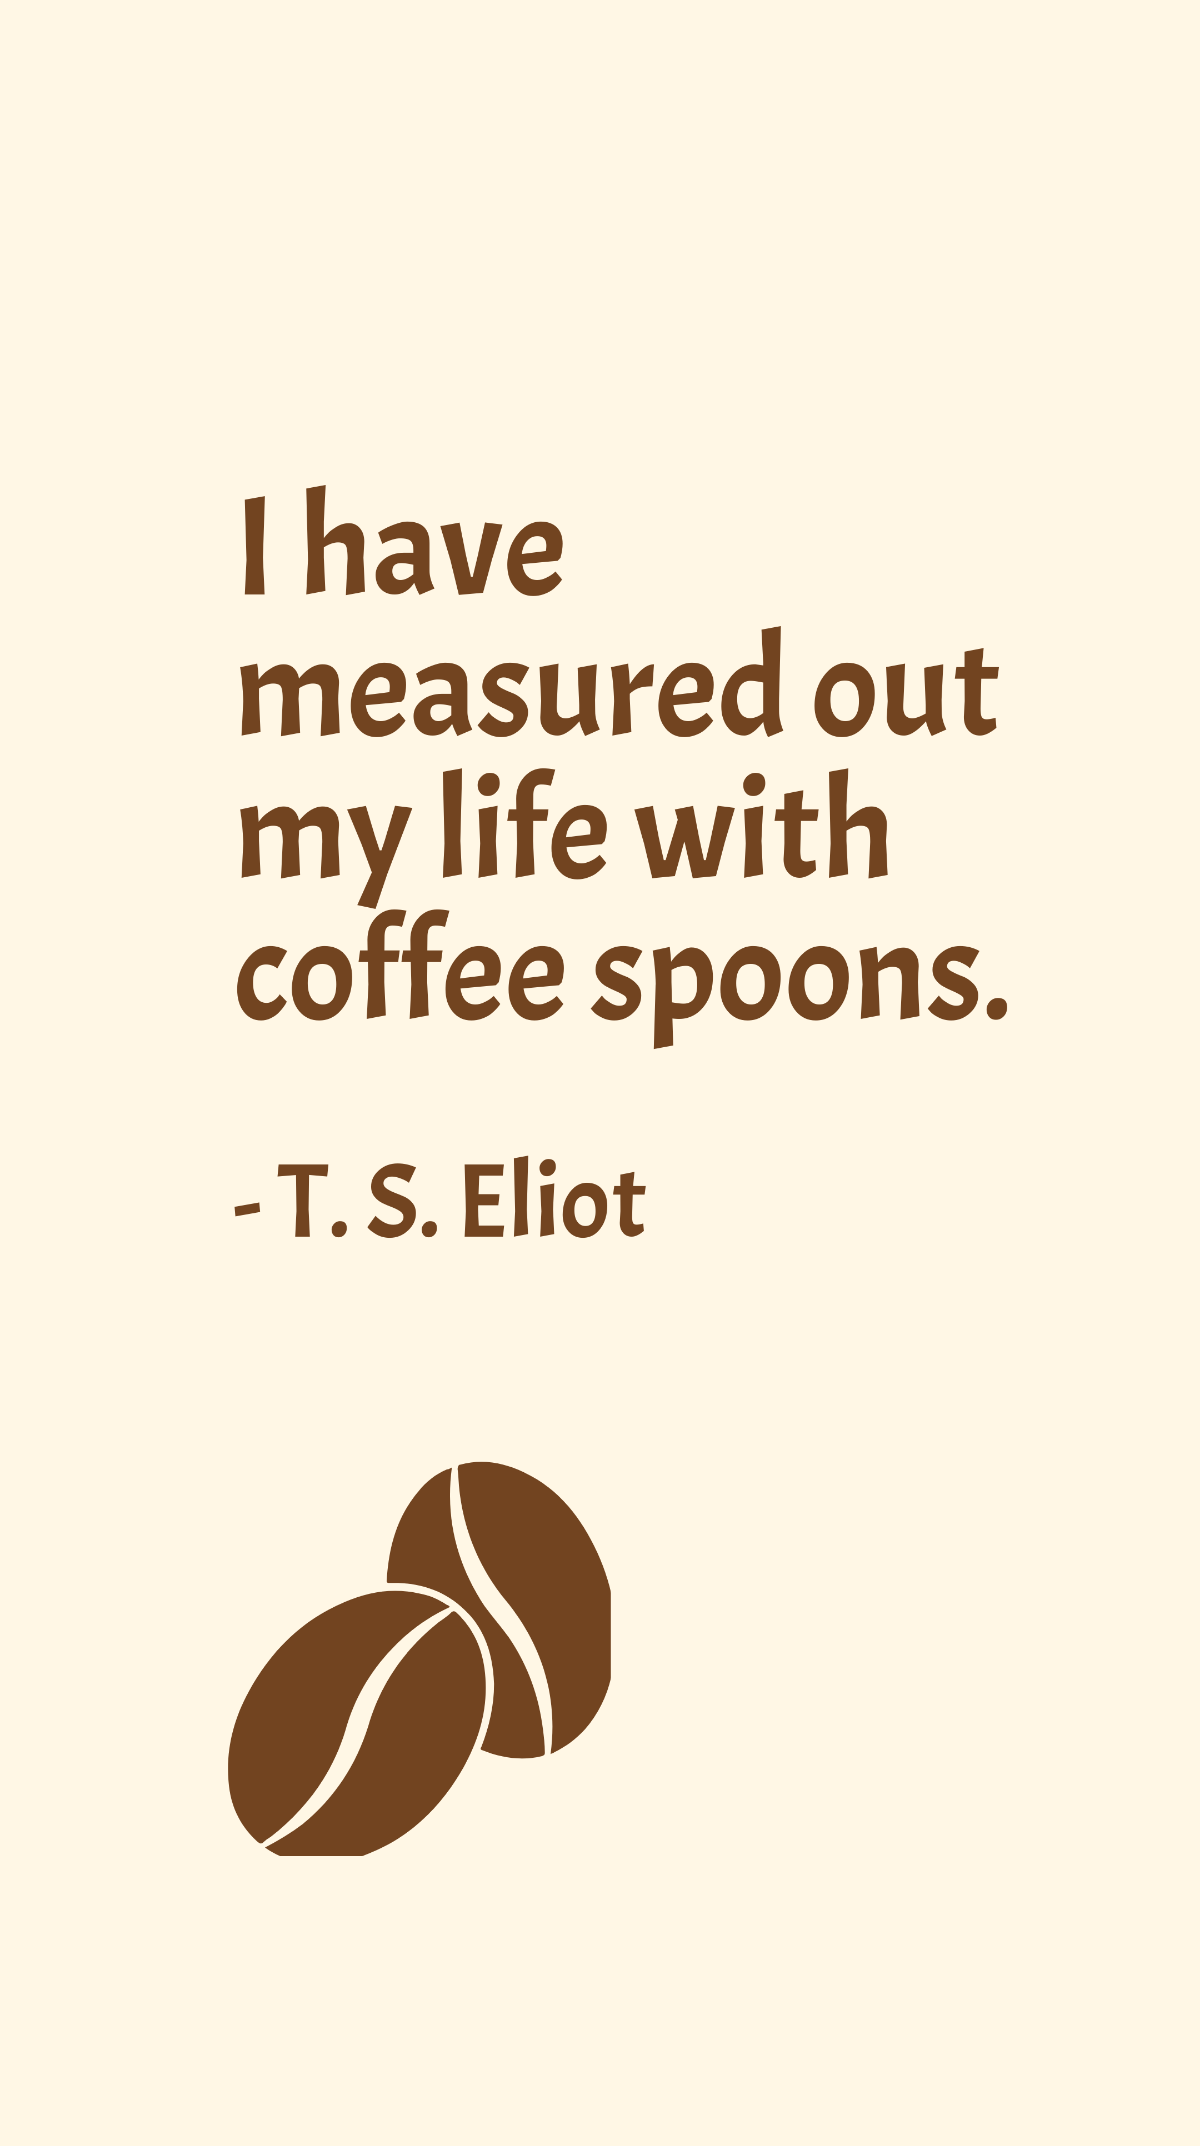 T. S. Eliot - I have measured out my life with coffee spoons. Template